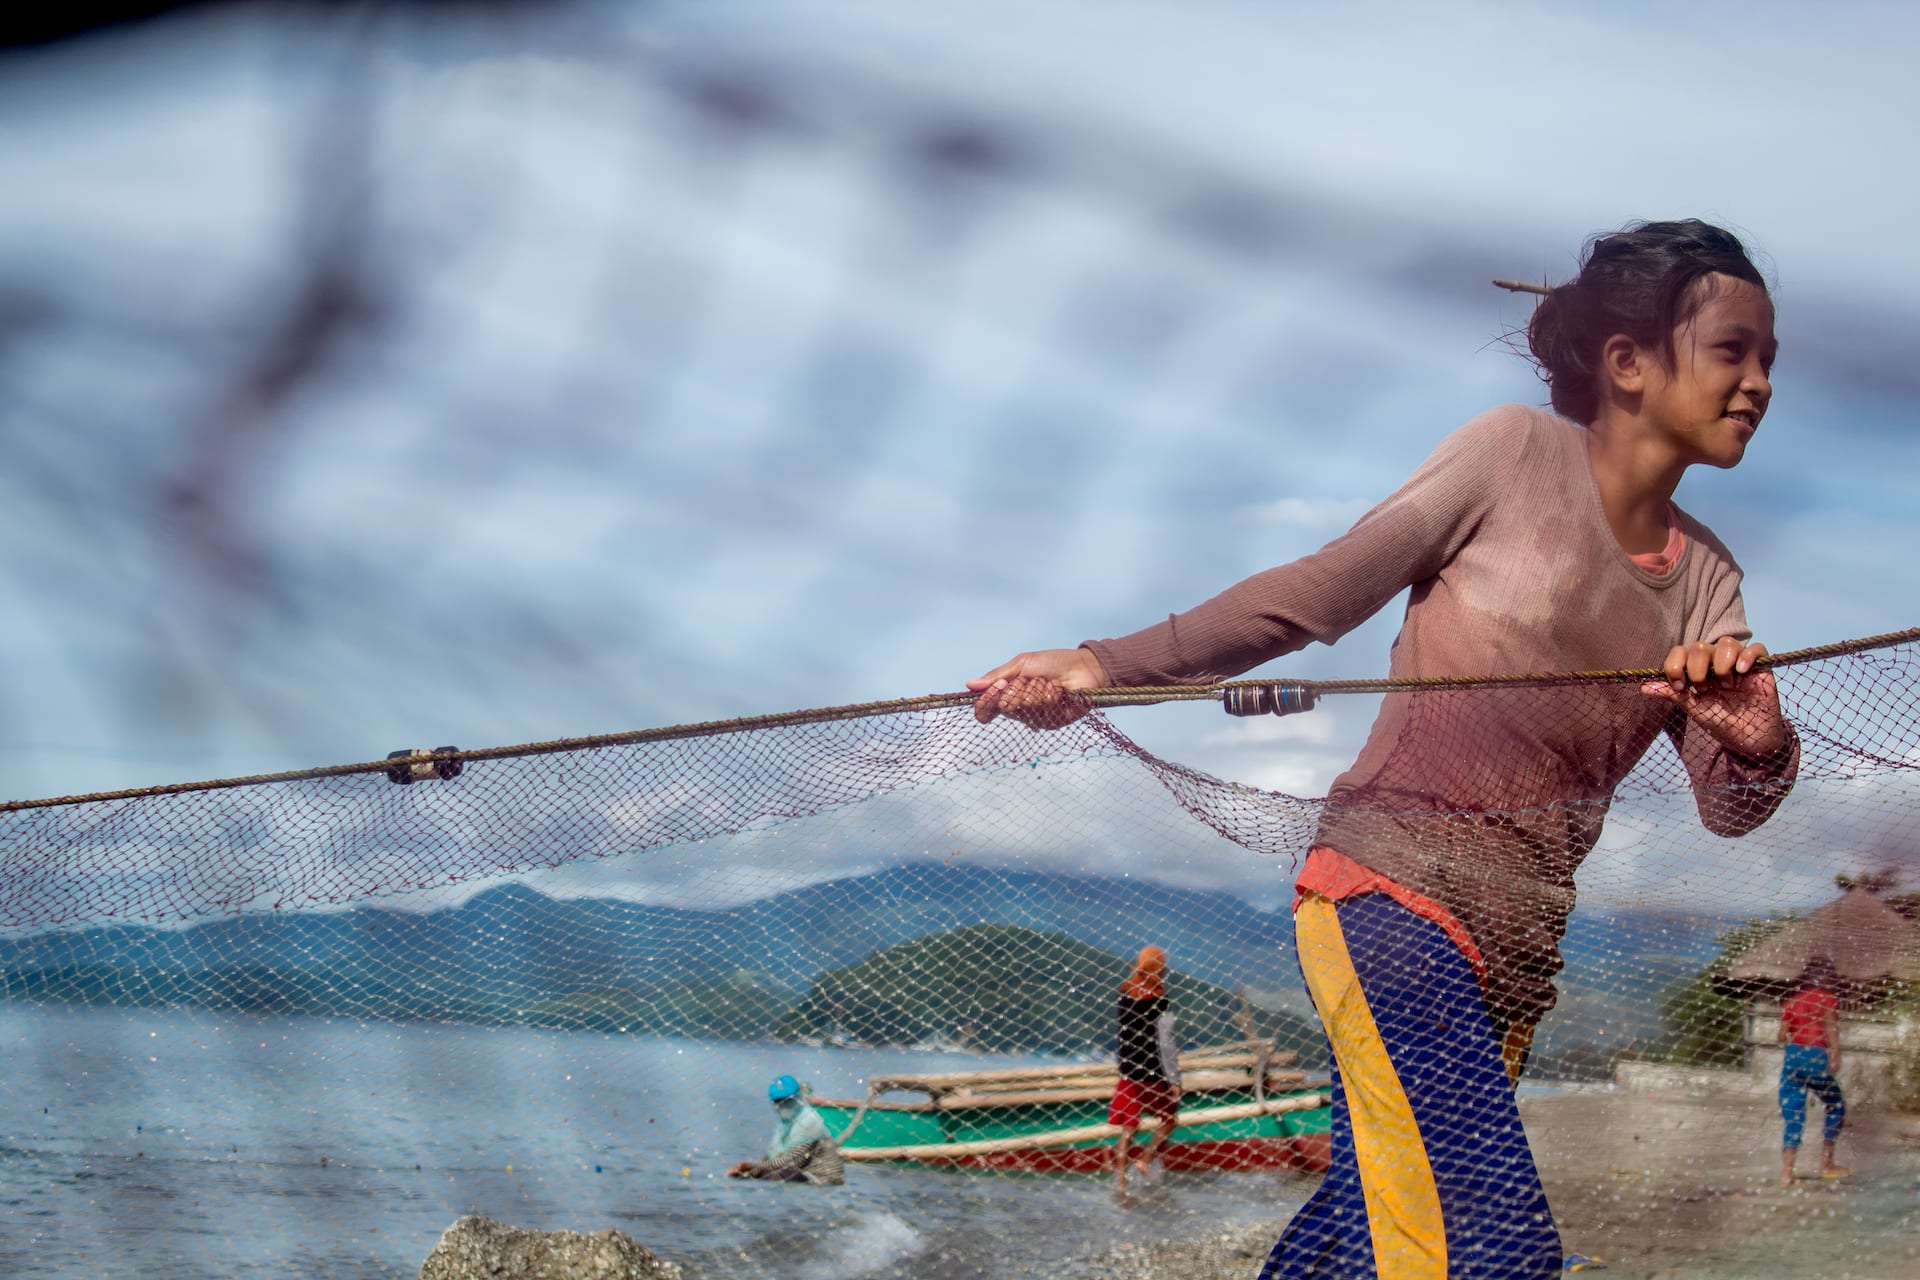 Ariane pulls a fishing net on the shore of the ocean.